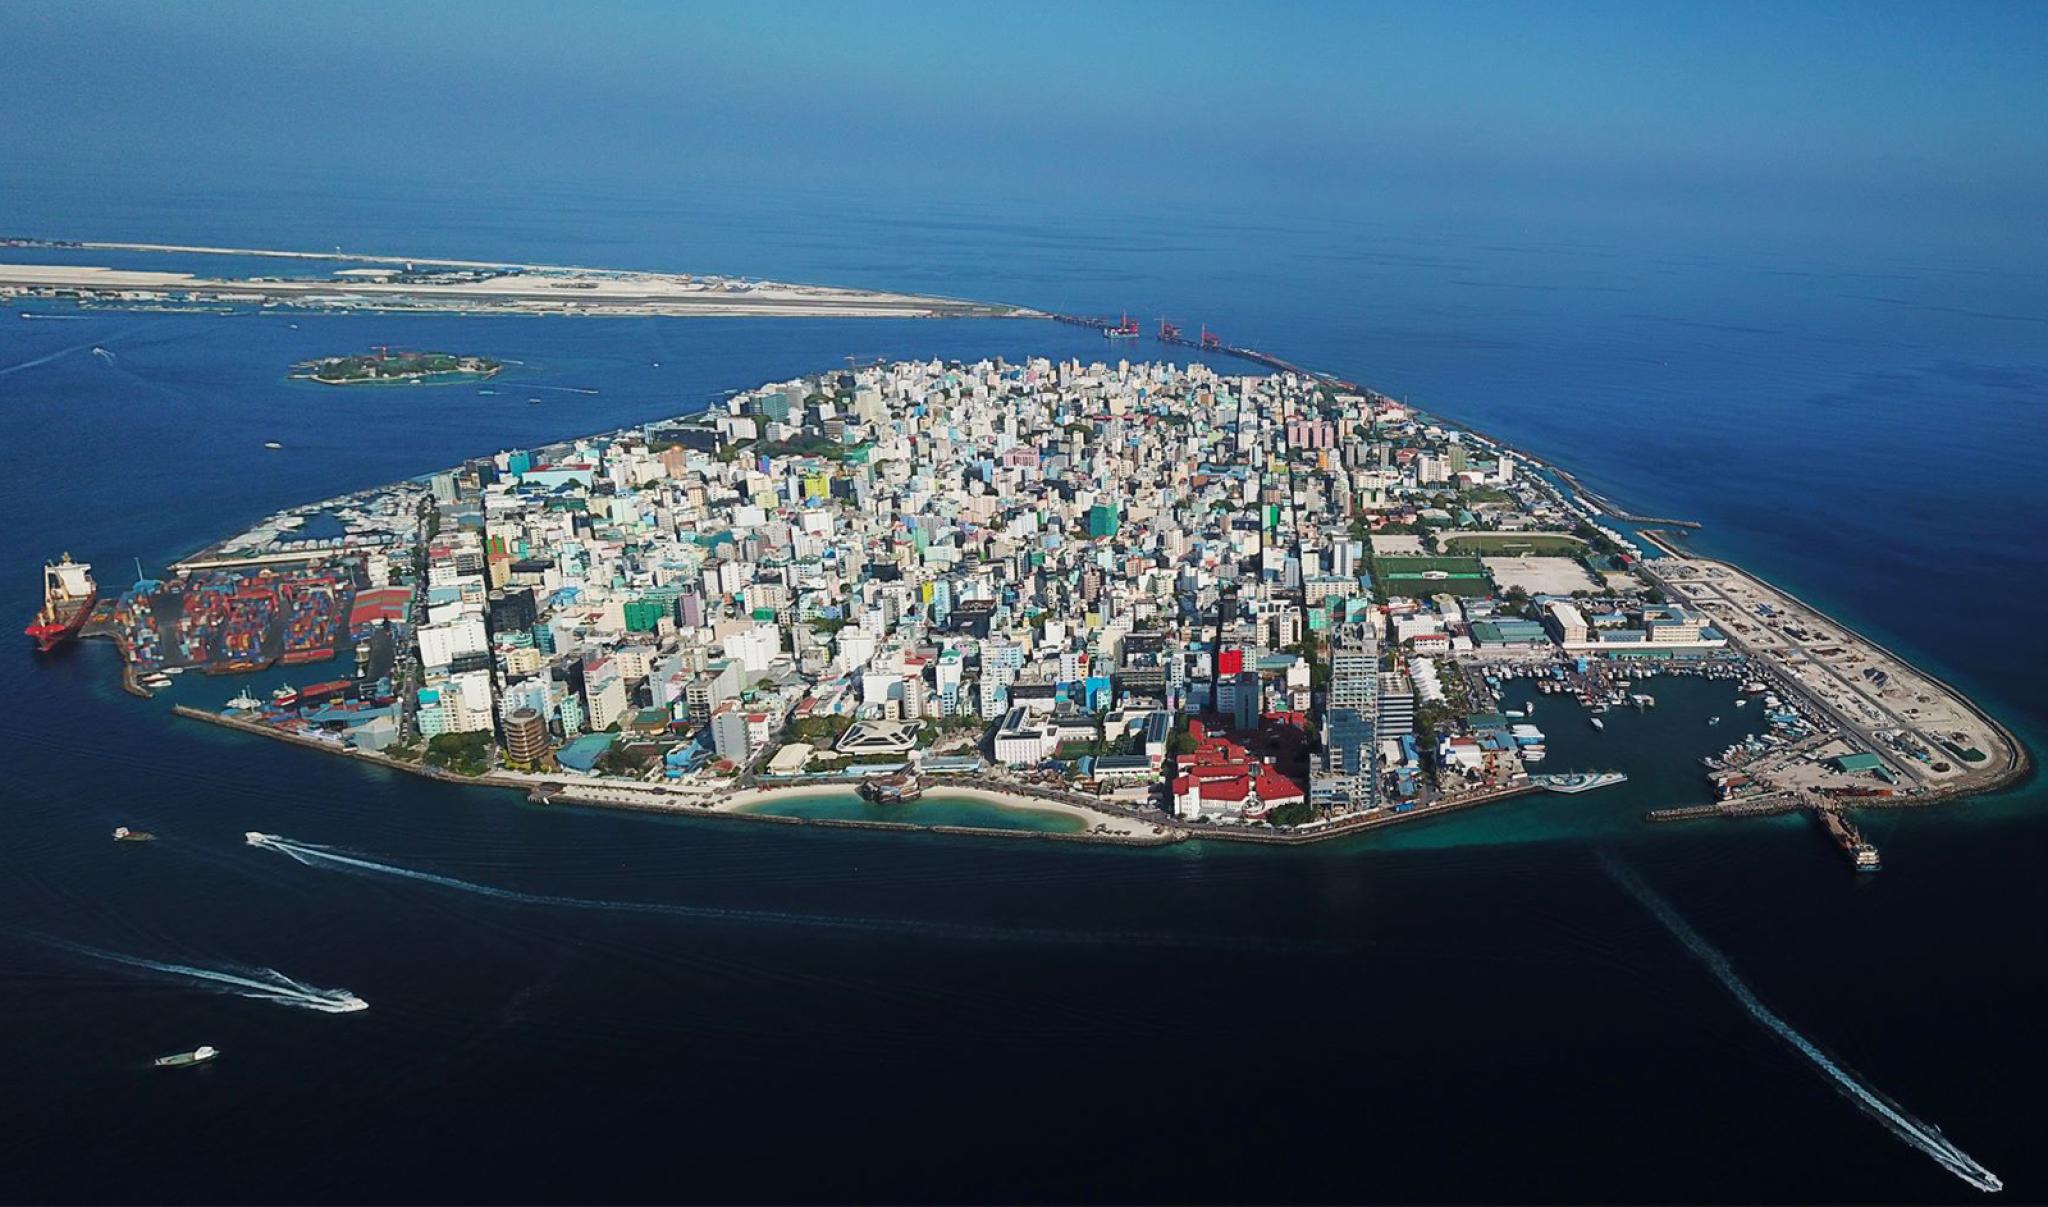 Aerial view of the Malé, Maldives viewed from the west